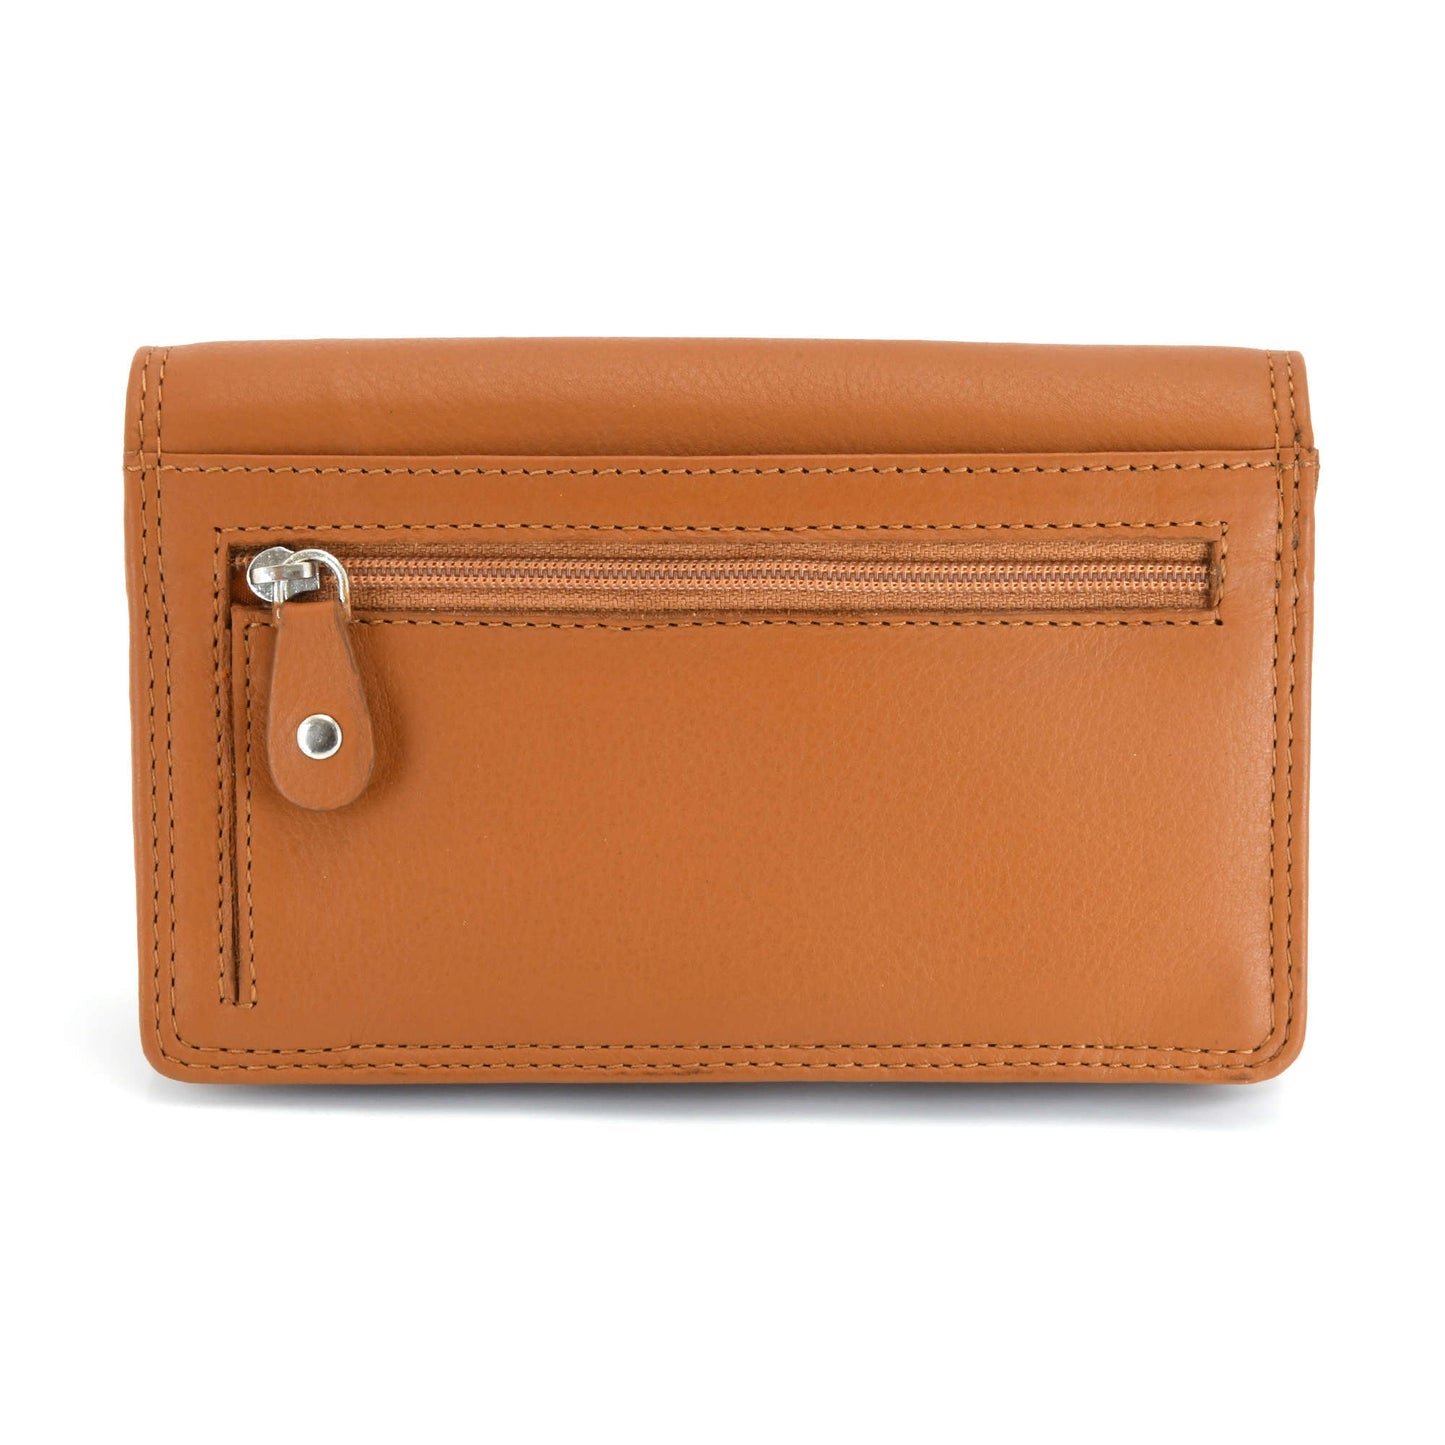 Style n Craft - 300956 Ladies Clutch Wallet in Leather - tan color - closed view back